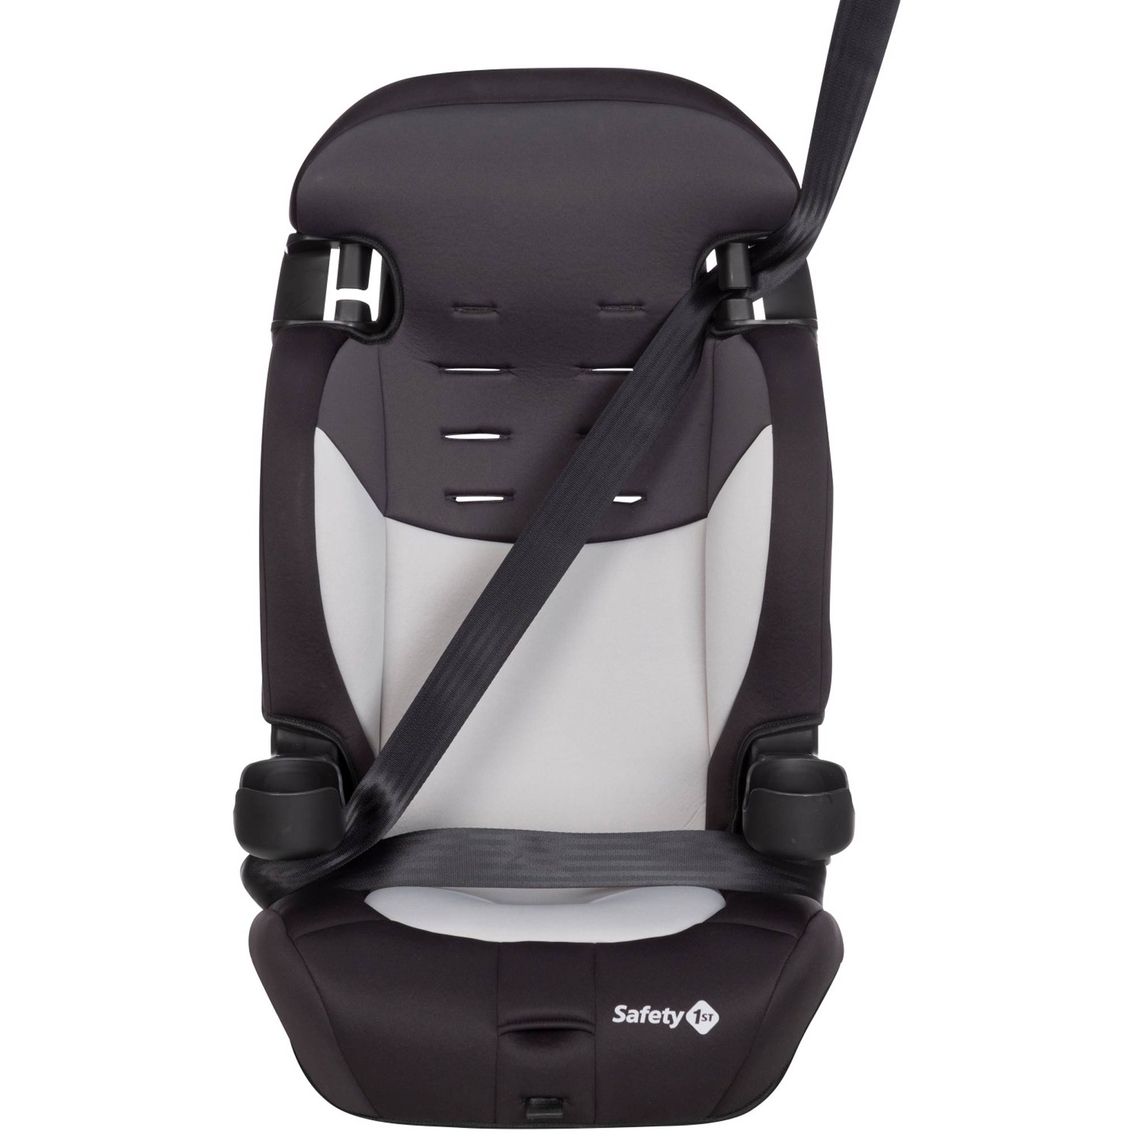 Safety 1st Grand 2 in 1 Booster Car Seat - Image 5 of 9